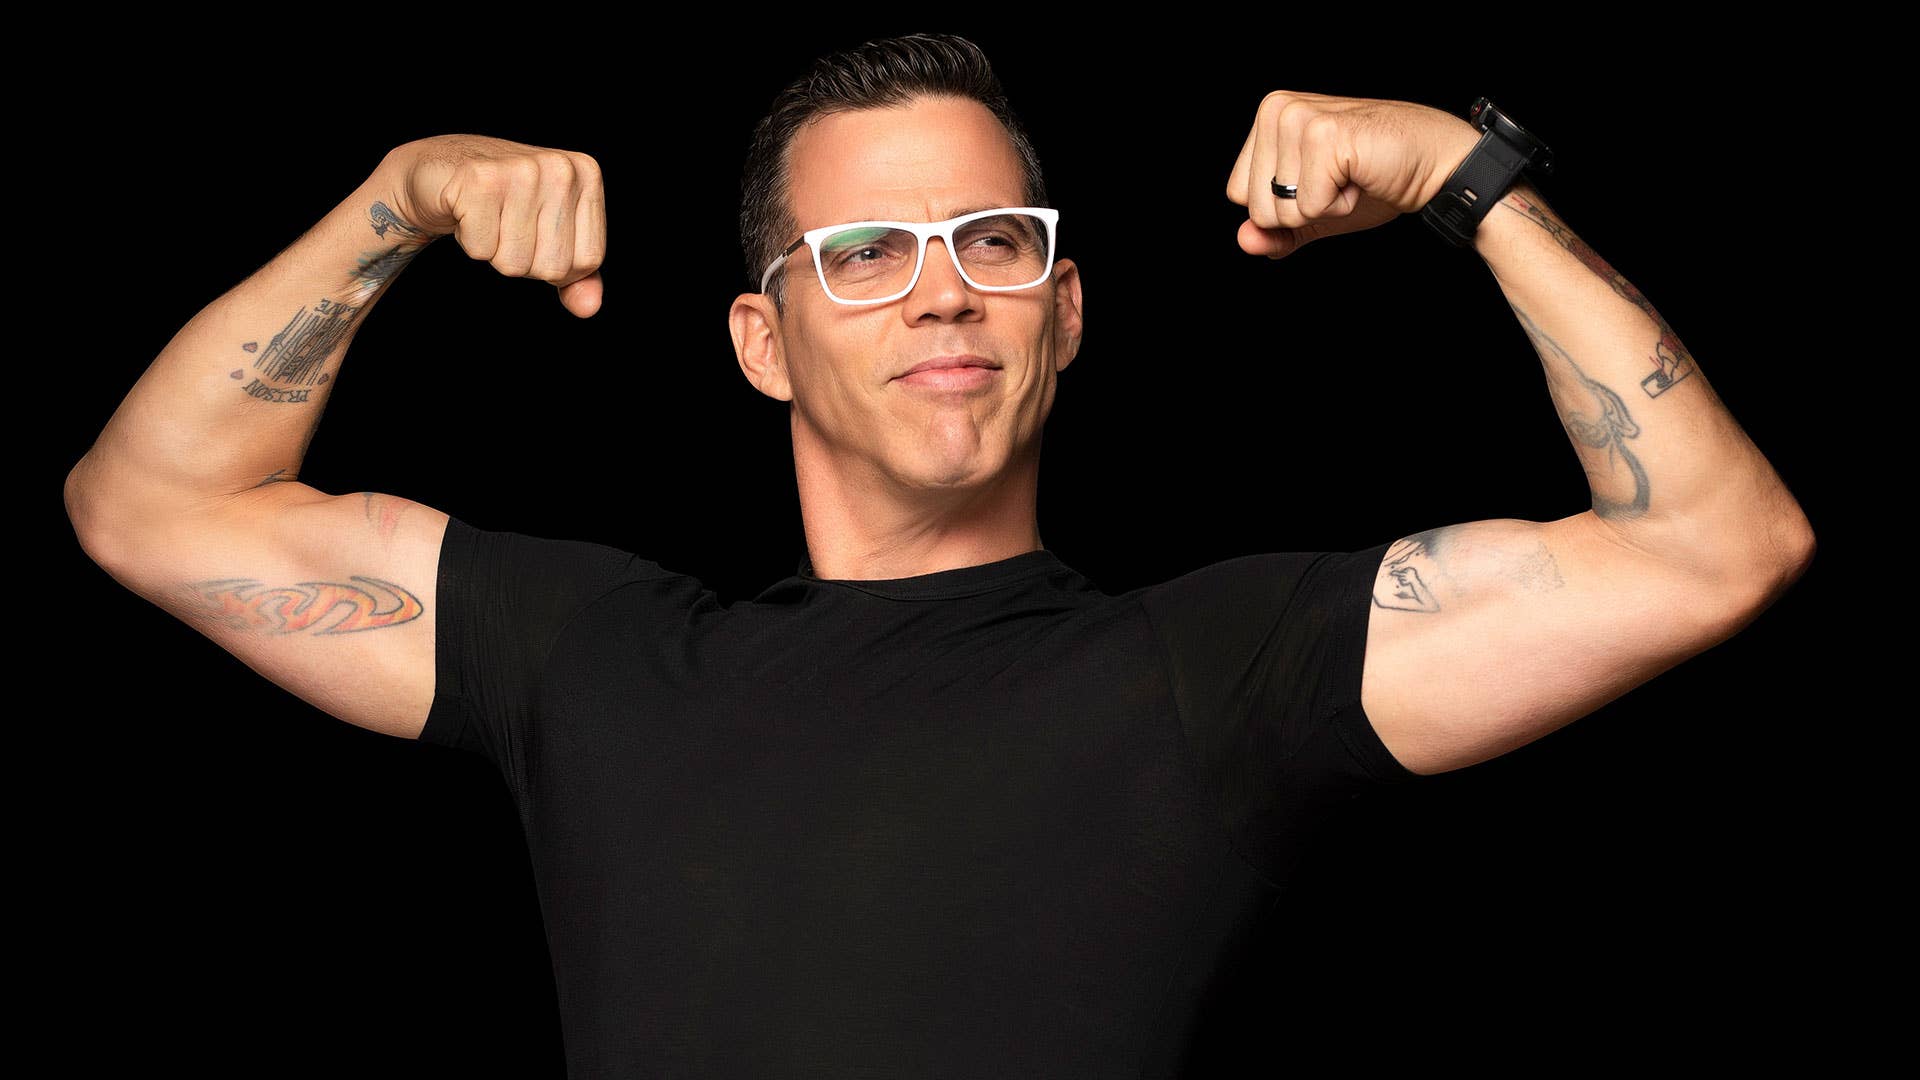 Steve-O poses in front of a black background